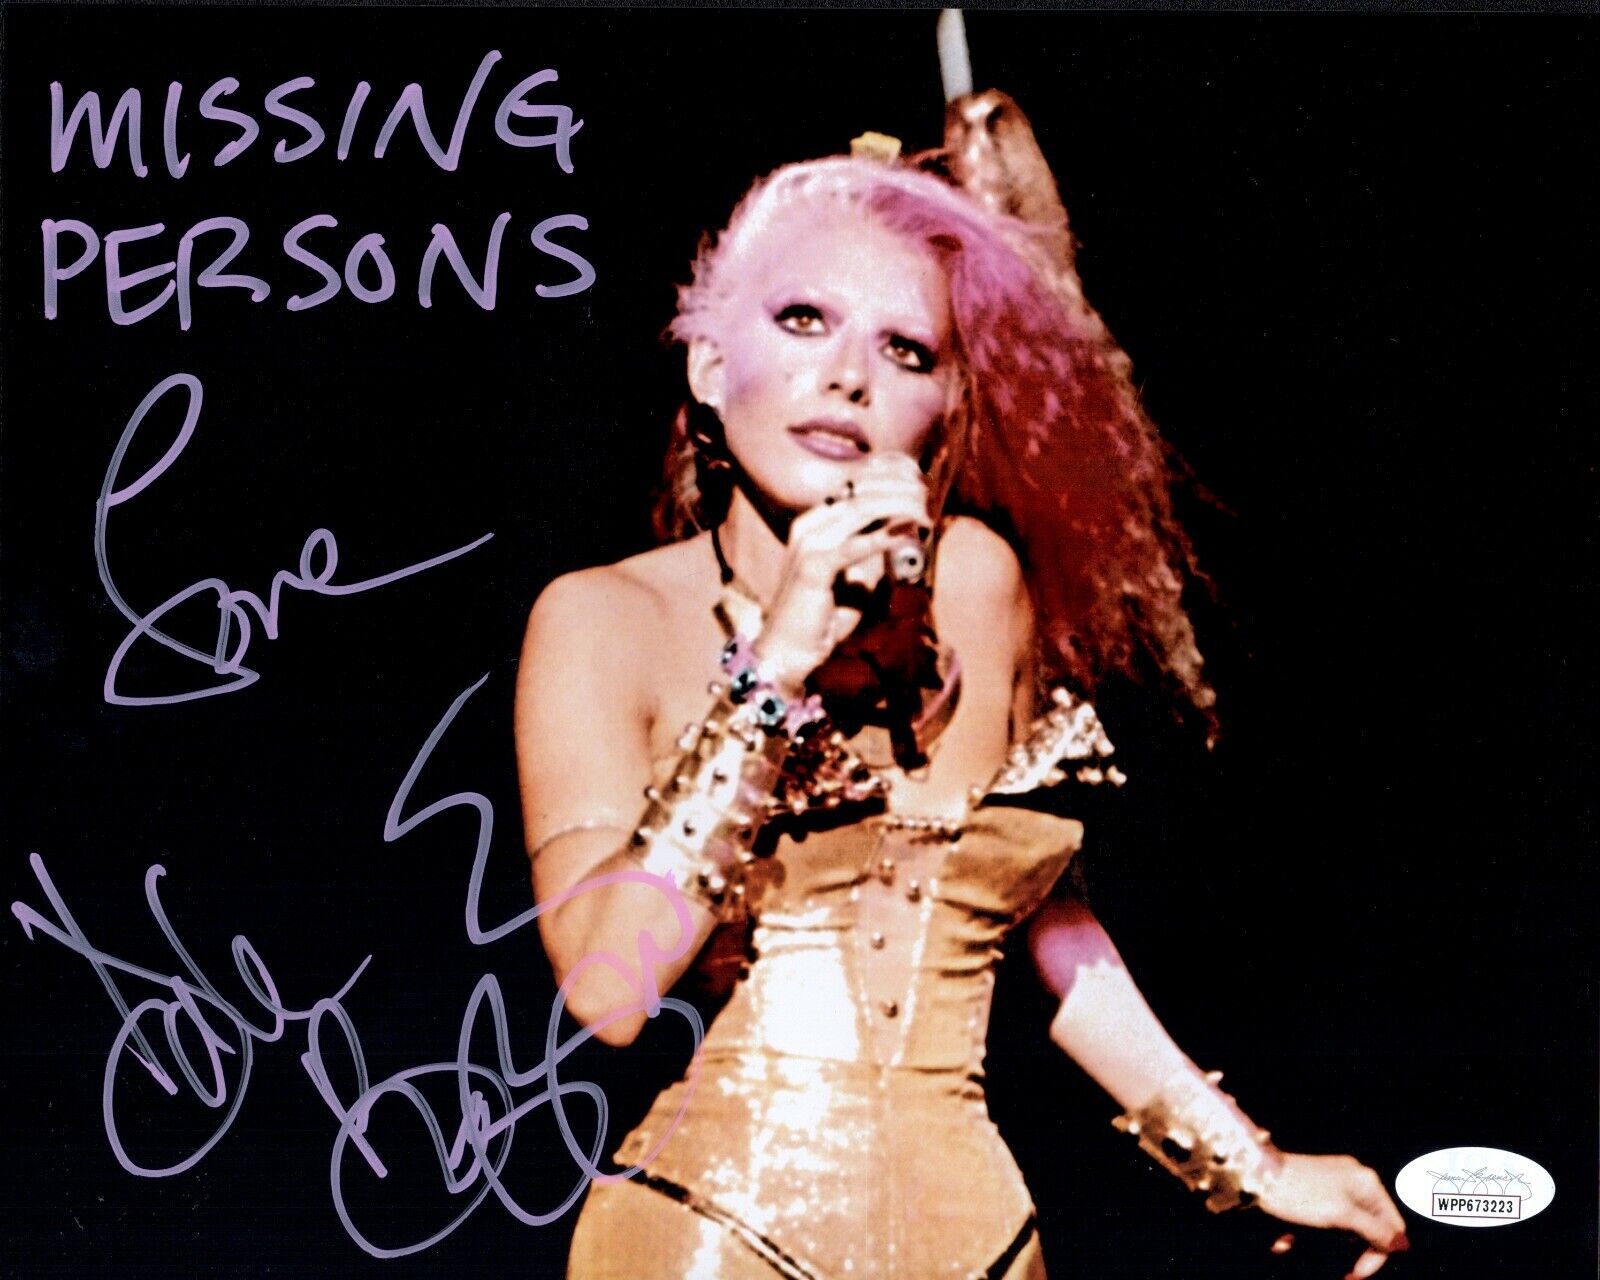 DALE BOZZIO Signed 8x10 Photo Poster painting MISSING PERSONS Lead Singer Autograph JSA COA WPP